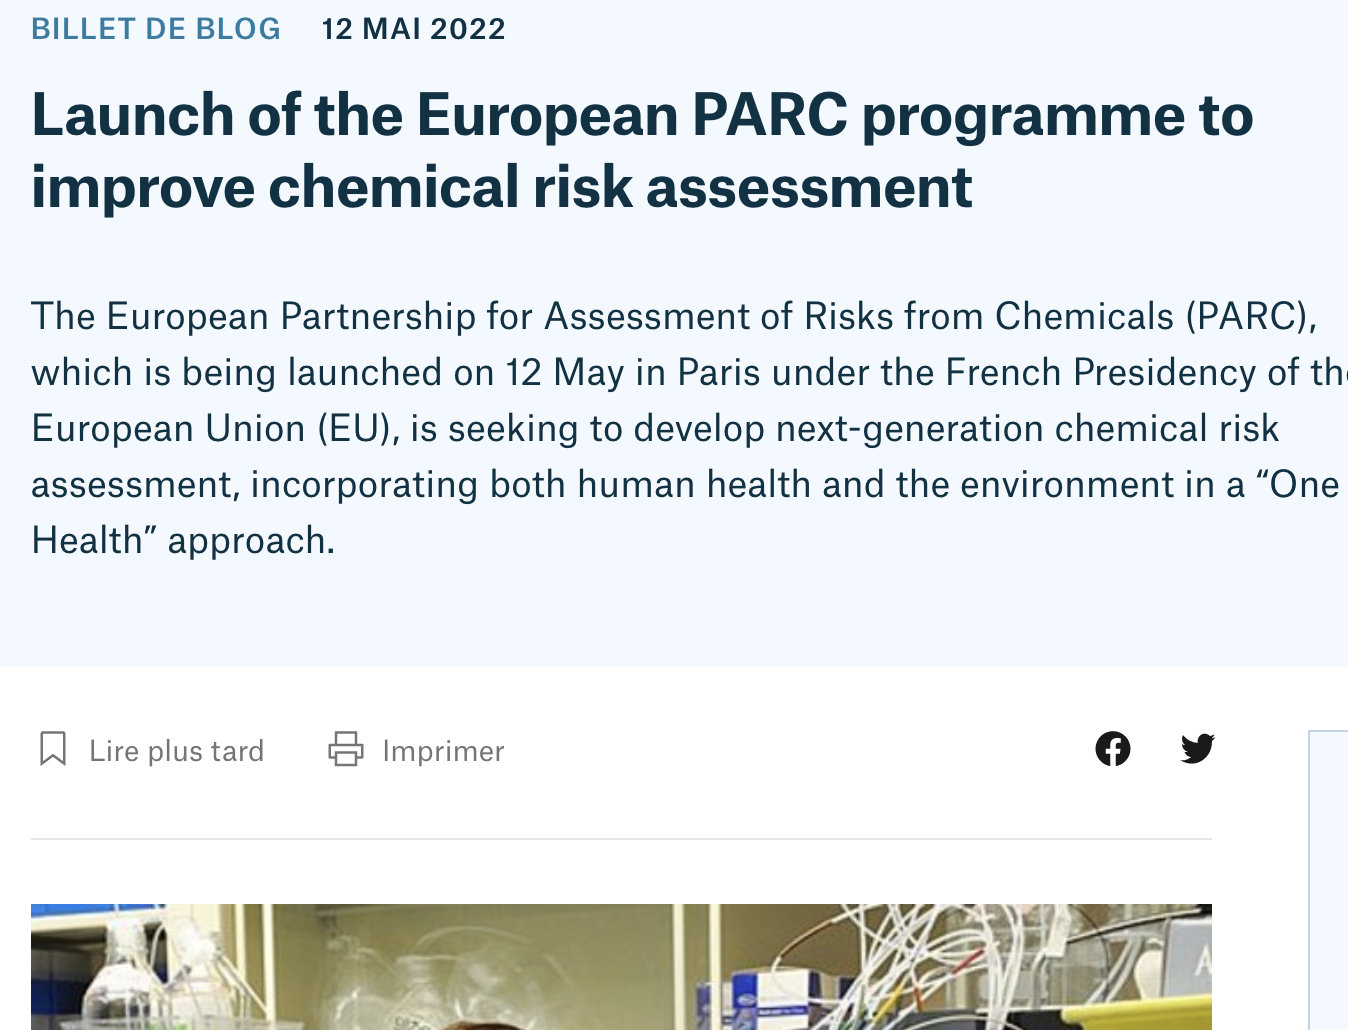 Launch of the European PARC programme to improve chemical risk assessment